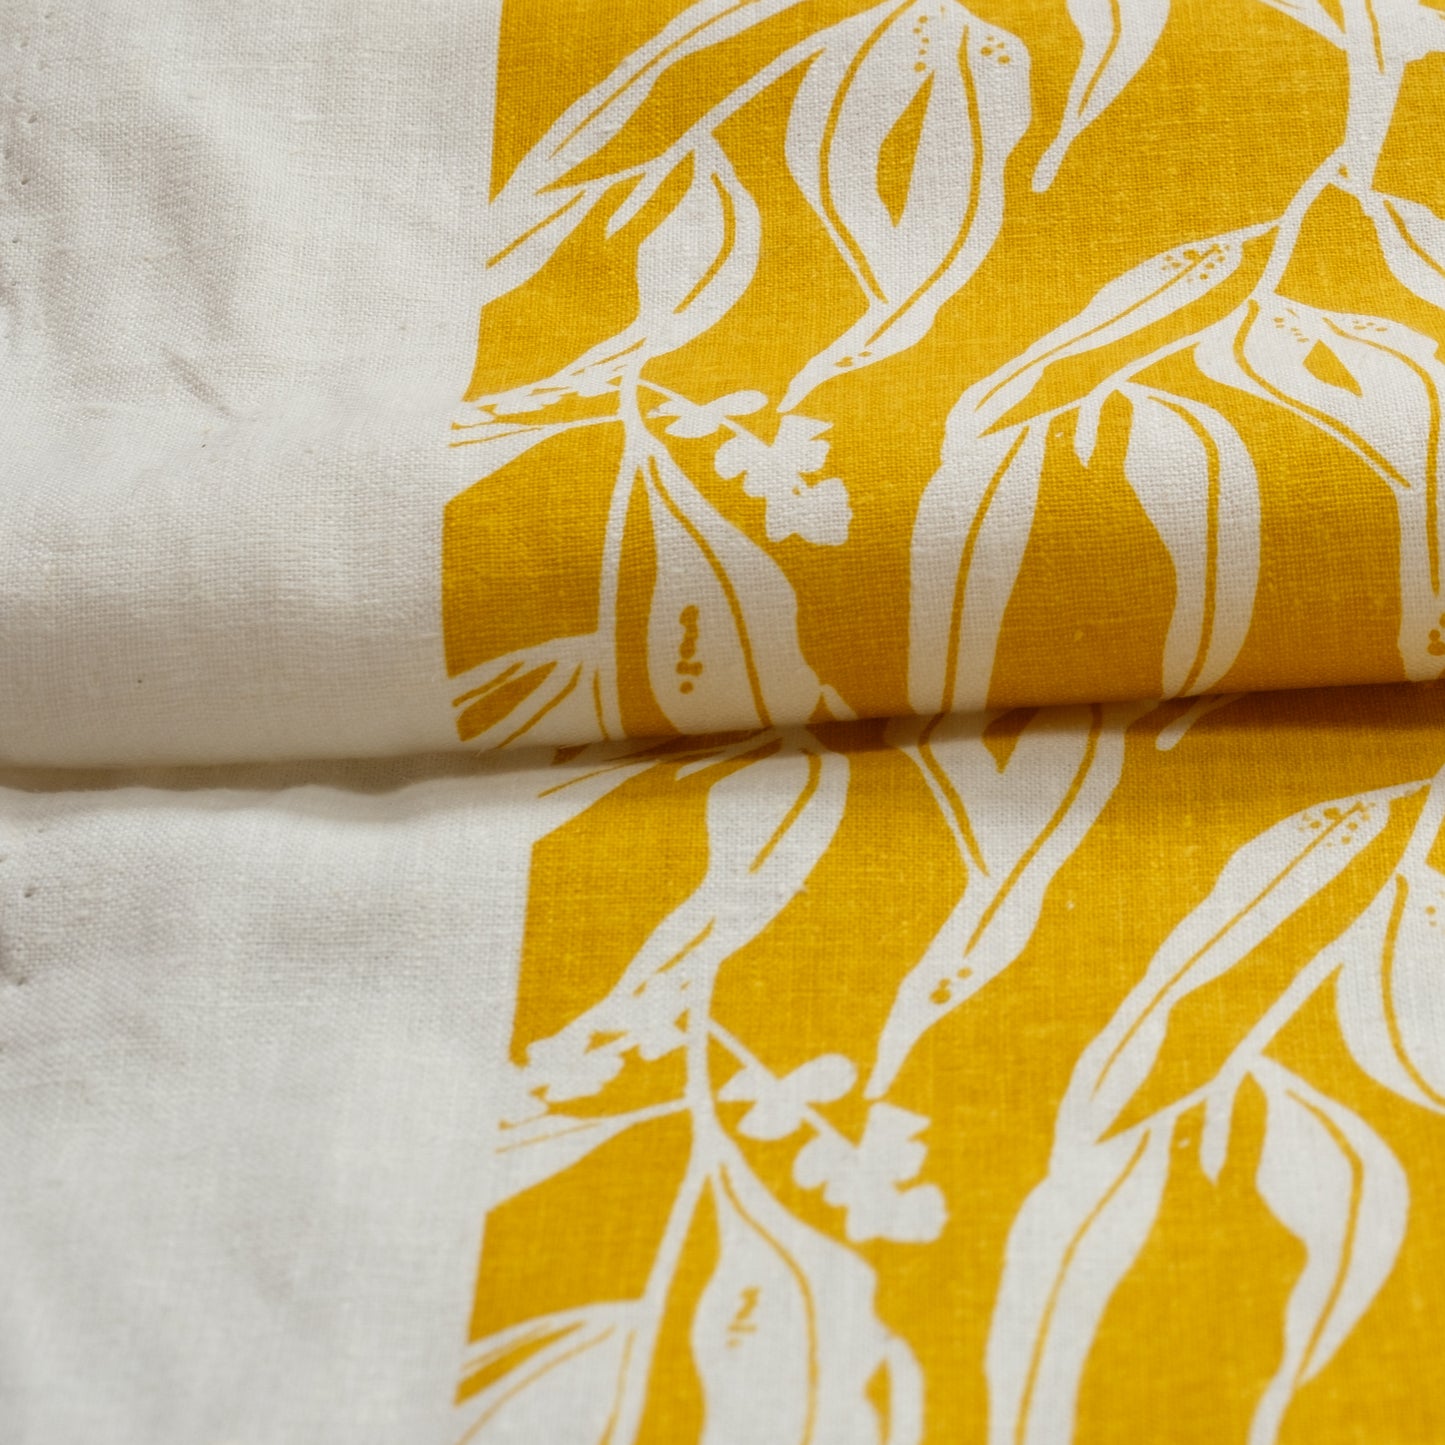 Organic cotton and hemp fabric screenprinted with pattern Nuts about Wattle in the colour Mustard. Designed and screenprinted in Melbourne by Femke Textiles.